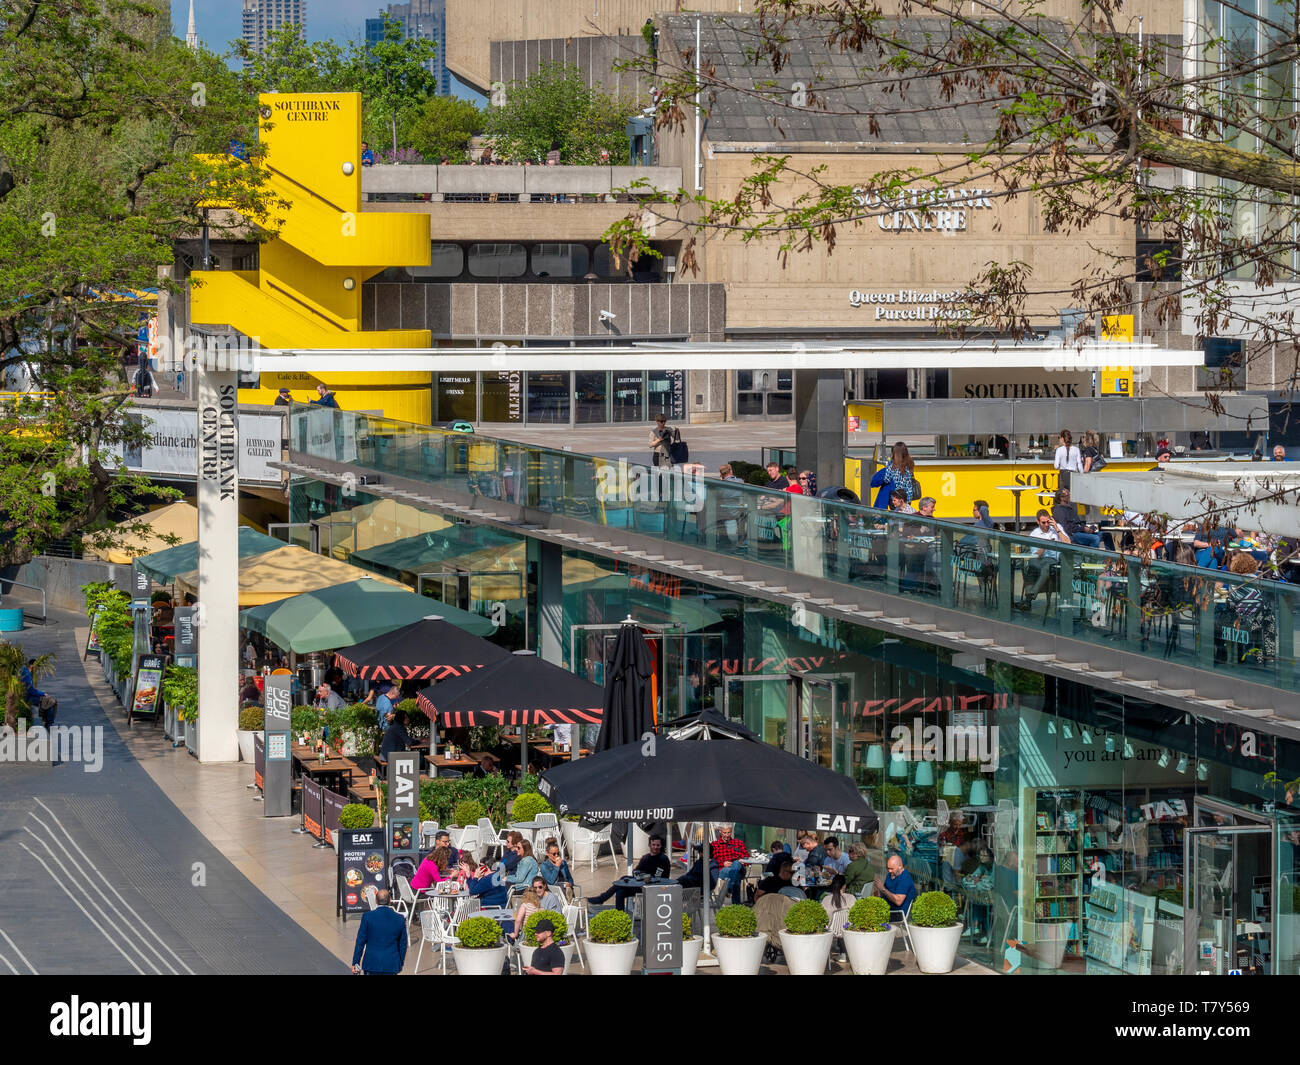 Queen Elizabeth Hall & Purcell Room, Southbank Centre, London, UK. Stock Photo